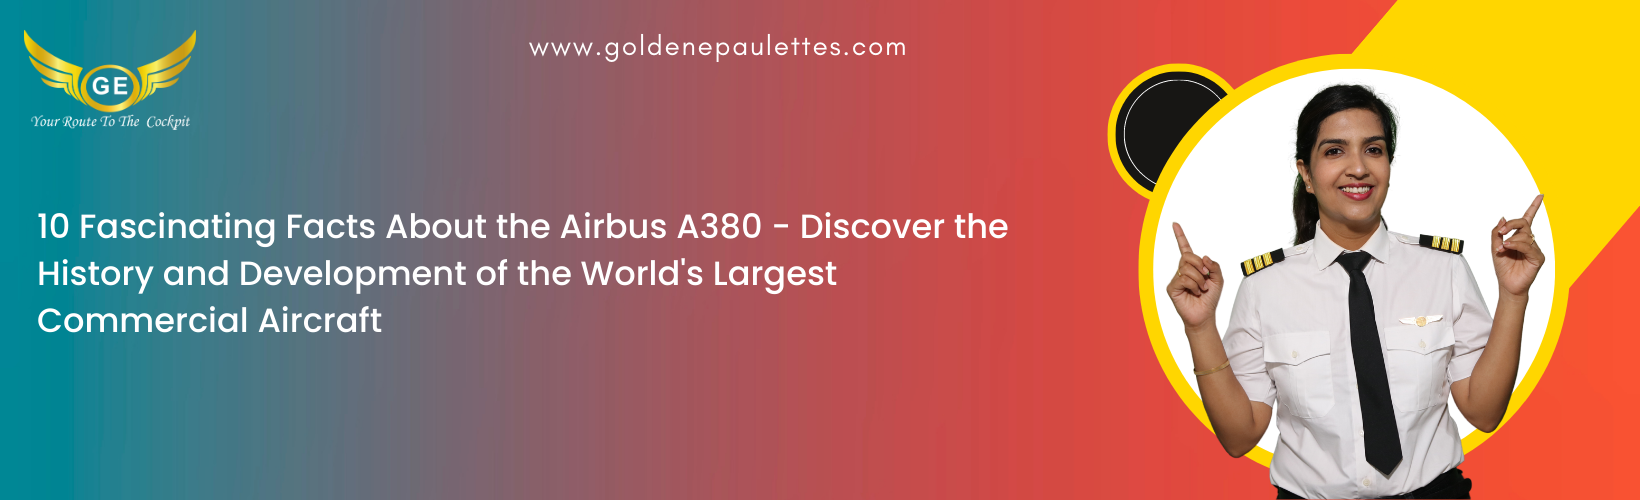 Interesting Facts about the Airbus A380